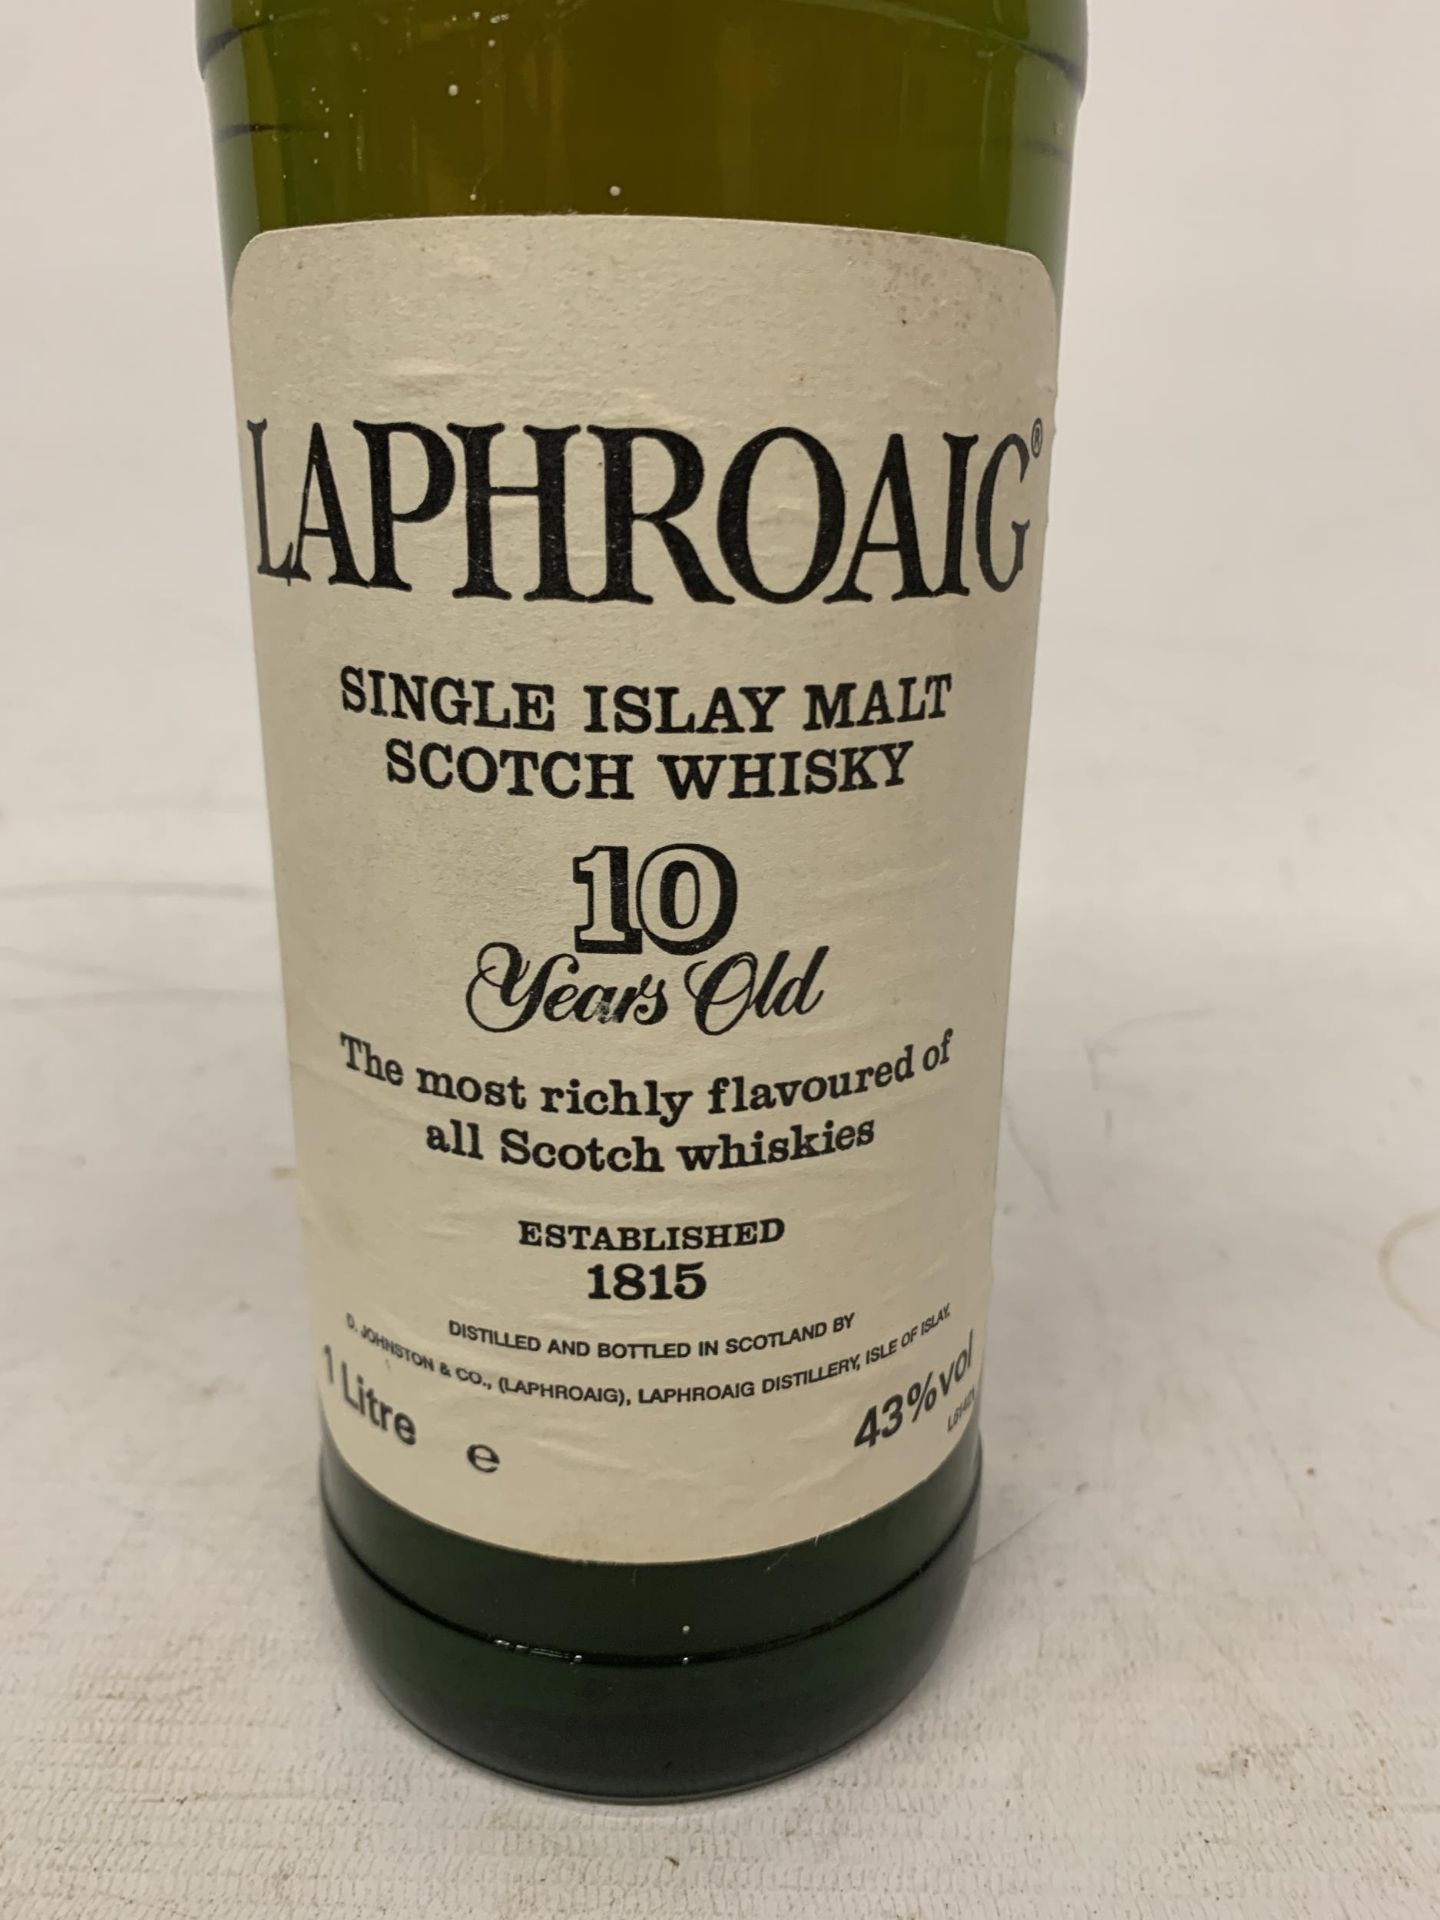 A 1L BOTTLE OF LAPHROAIG 10 YEARS OLD SINGLE ISLAY MALT SCOTCH WHISKY, OLD LABEL - Image 2 of 4